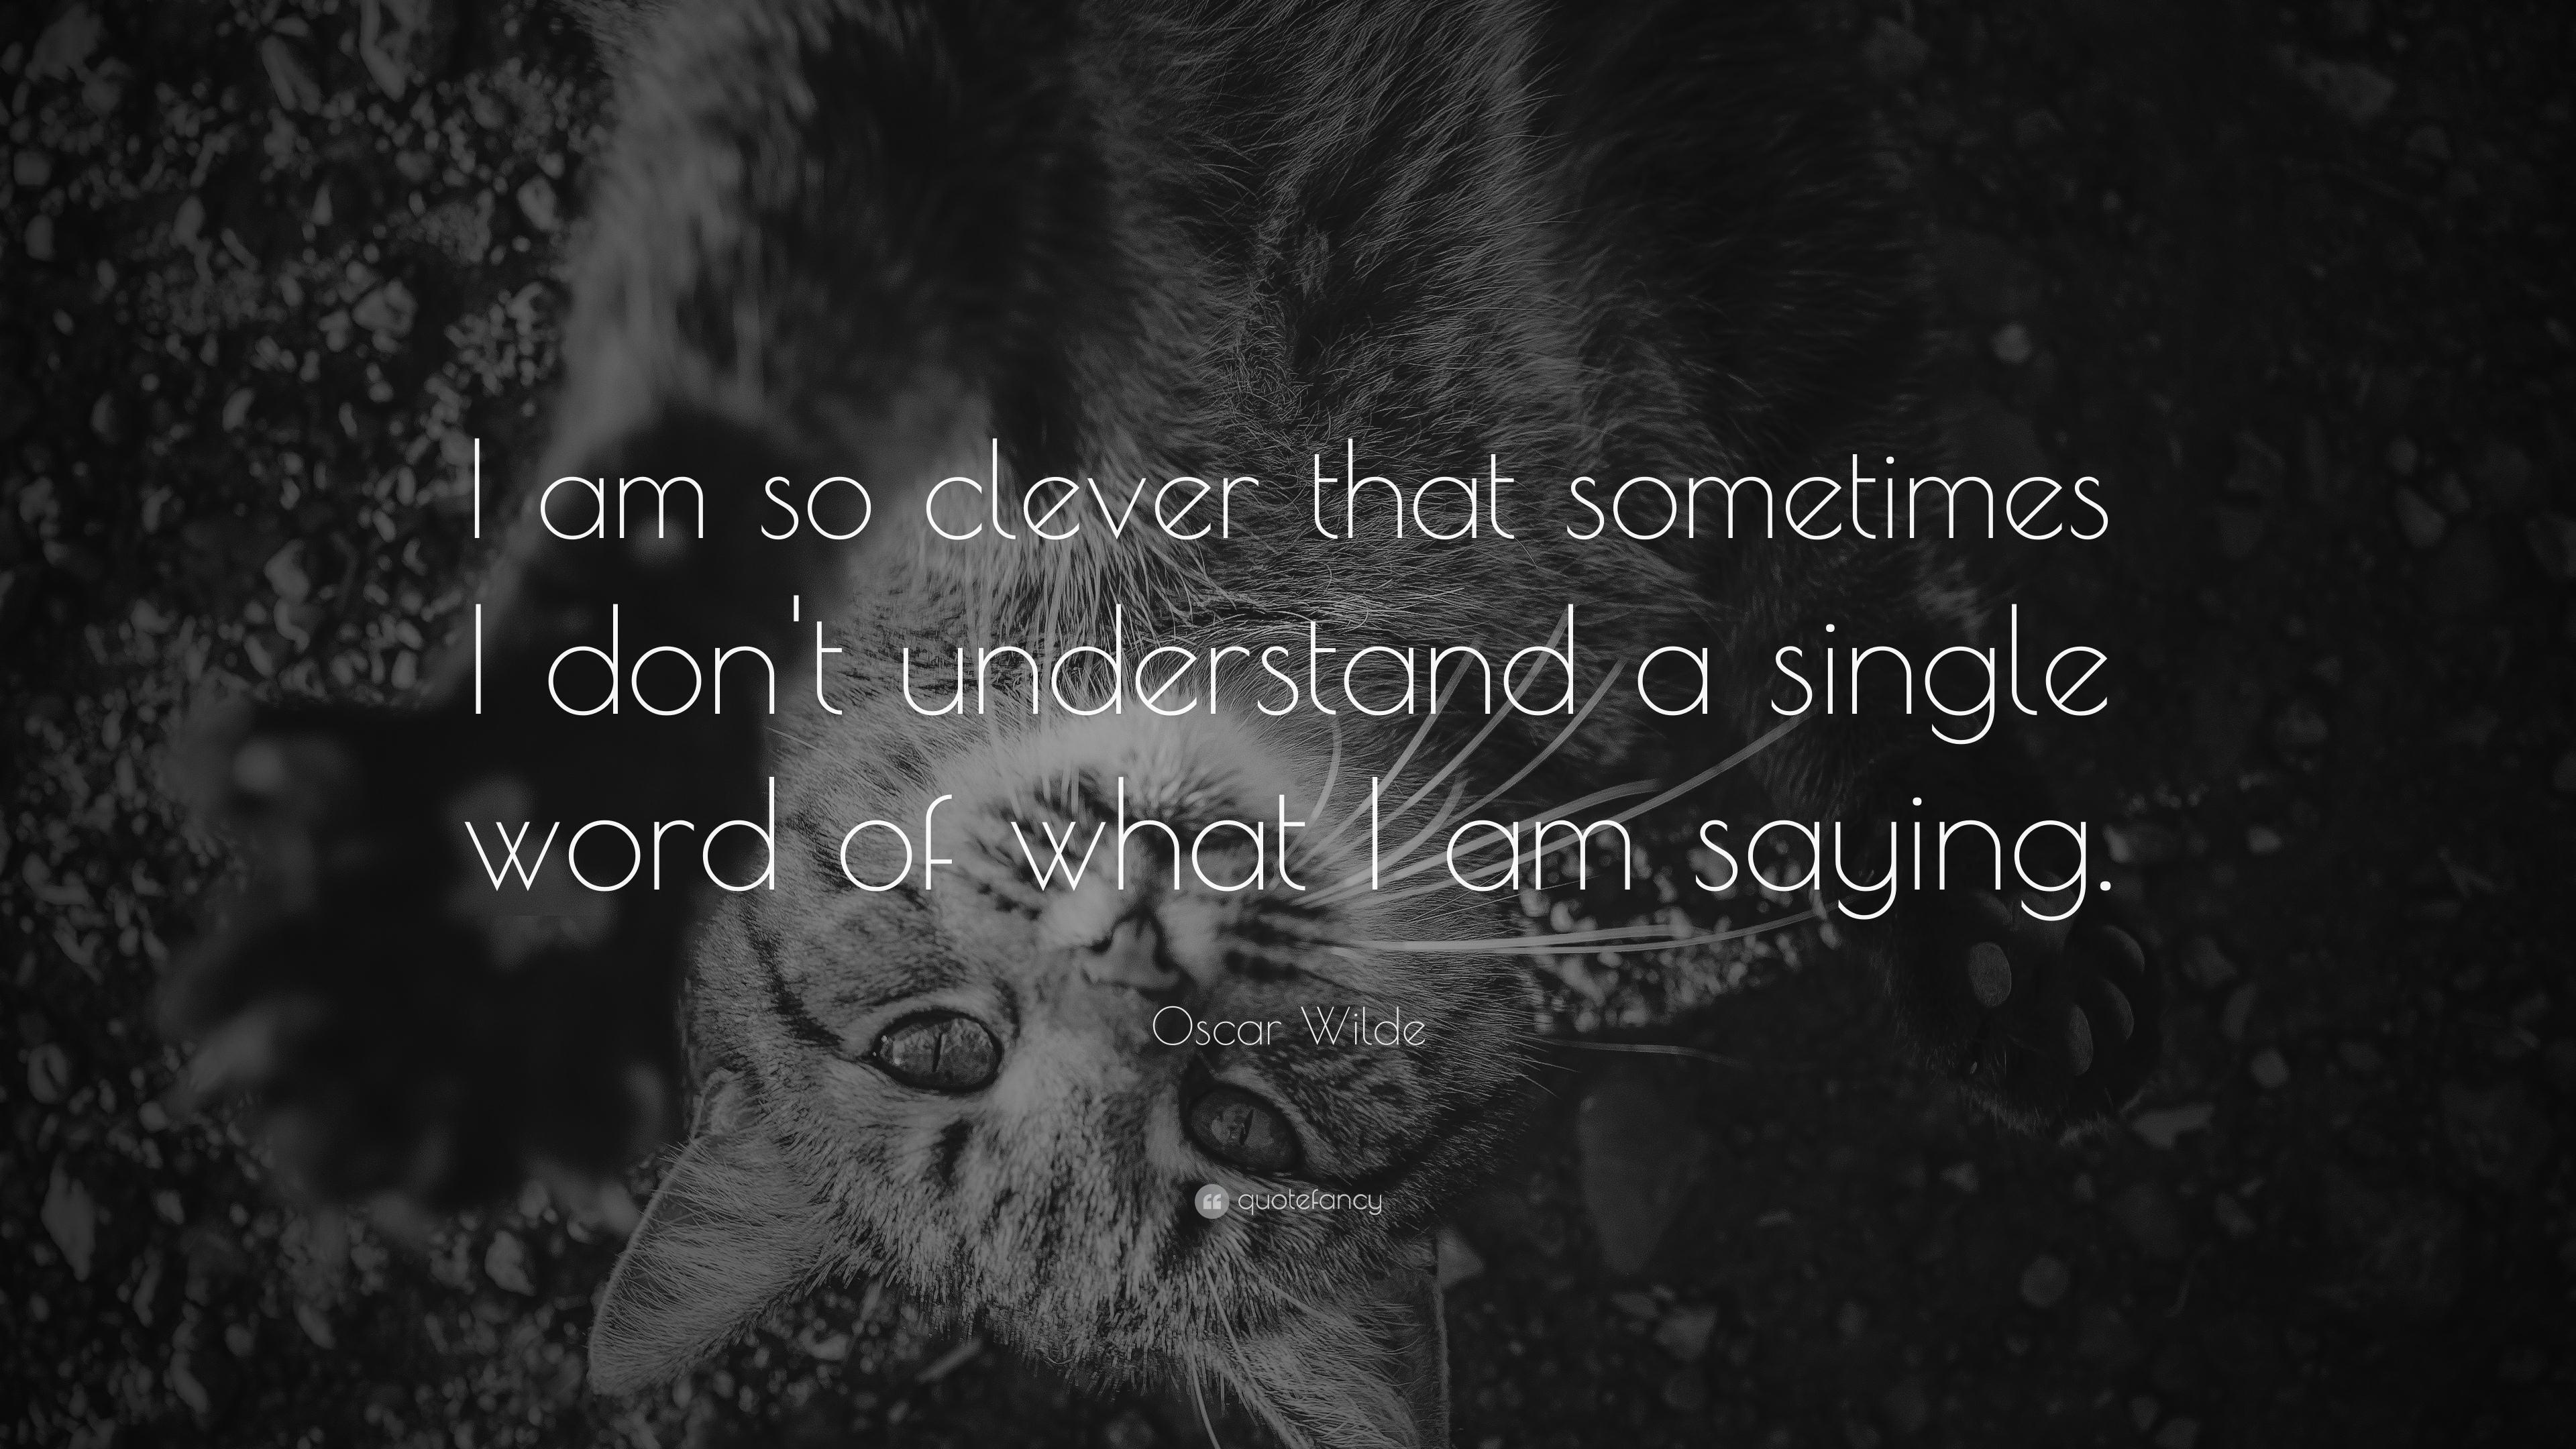 Oscar Wilde Quote: “I am so clever that sometimes I don't understand